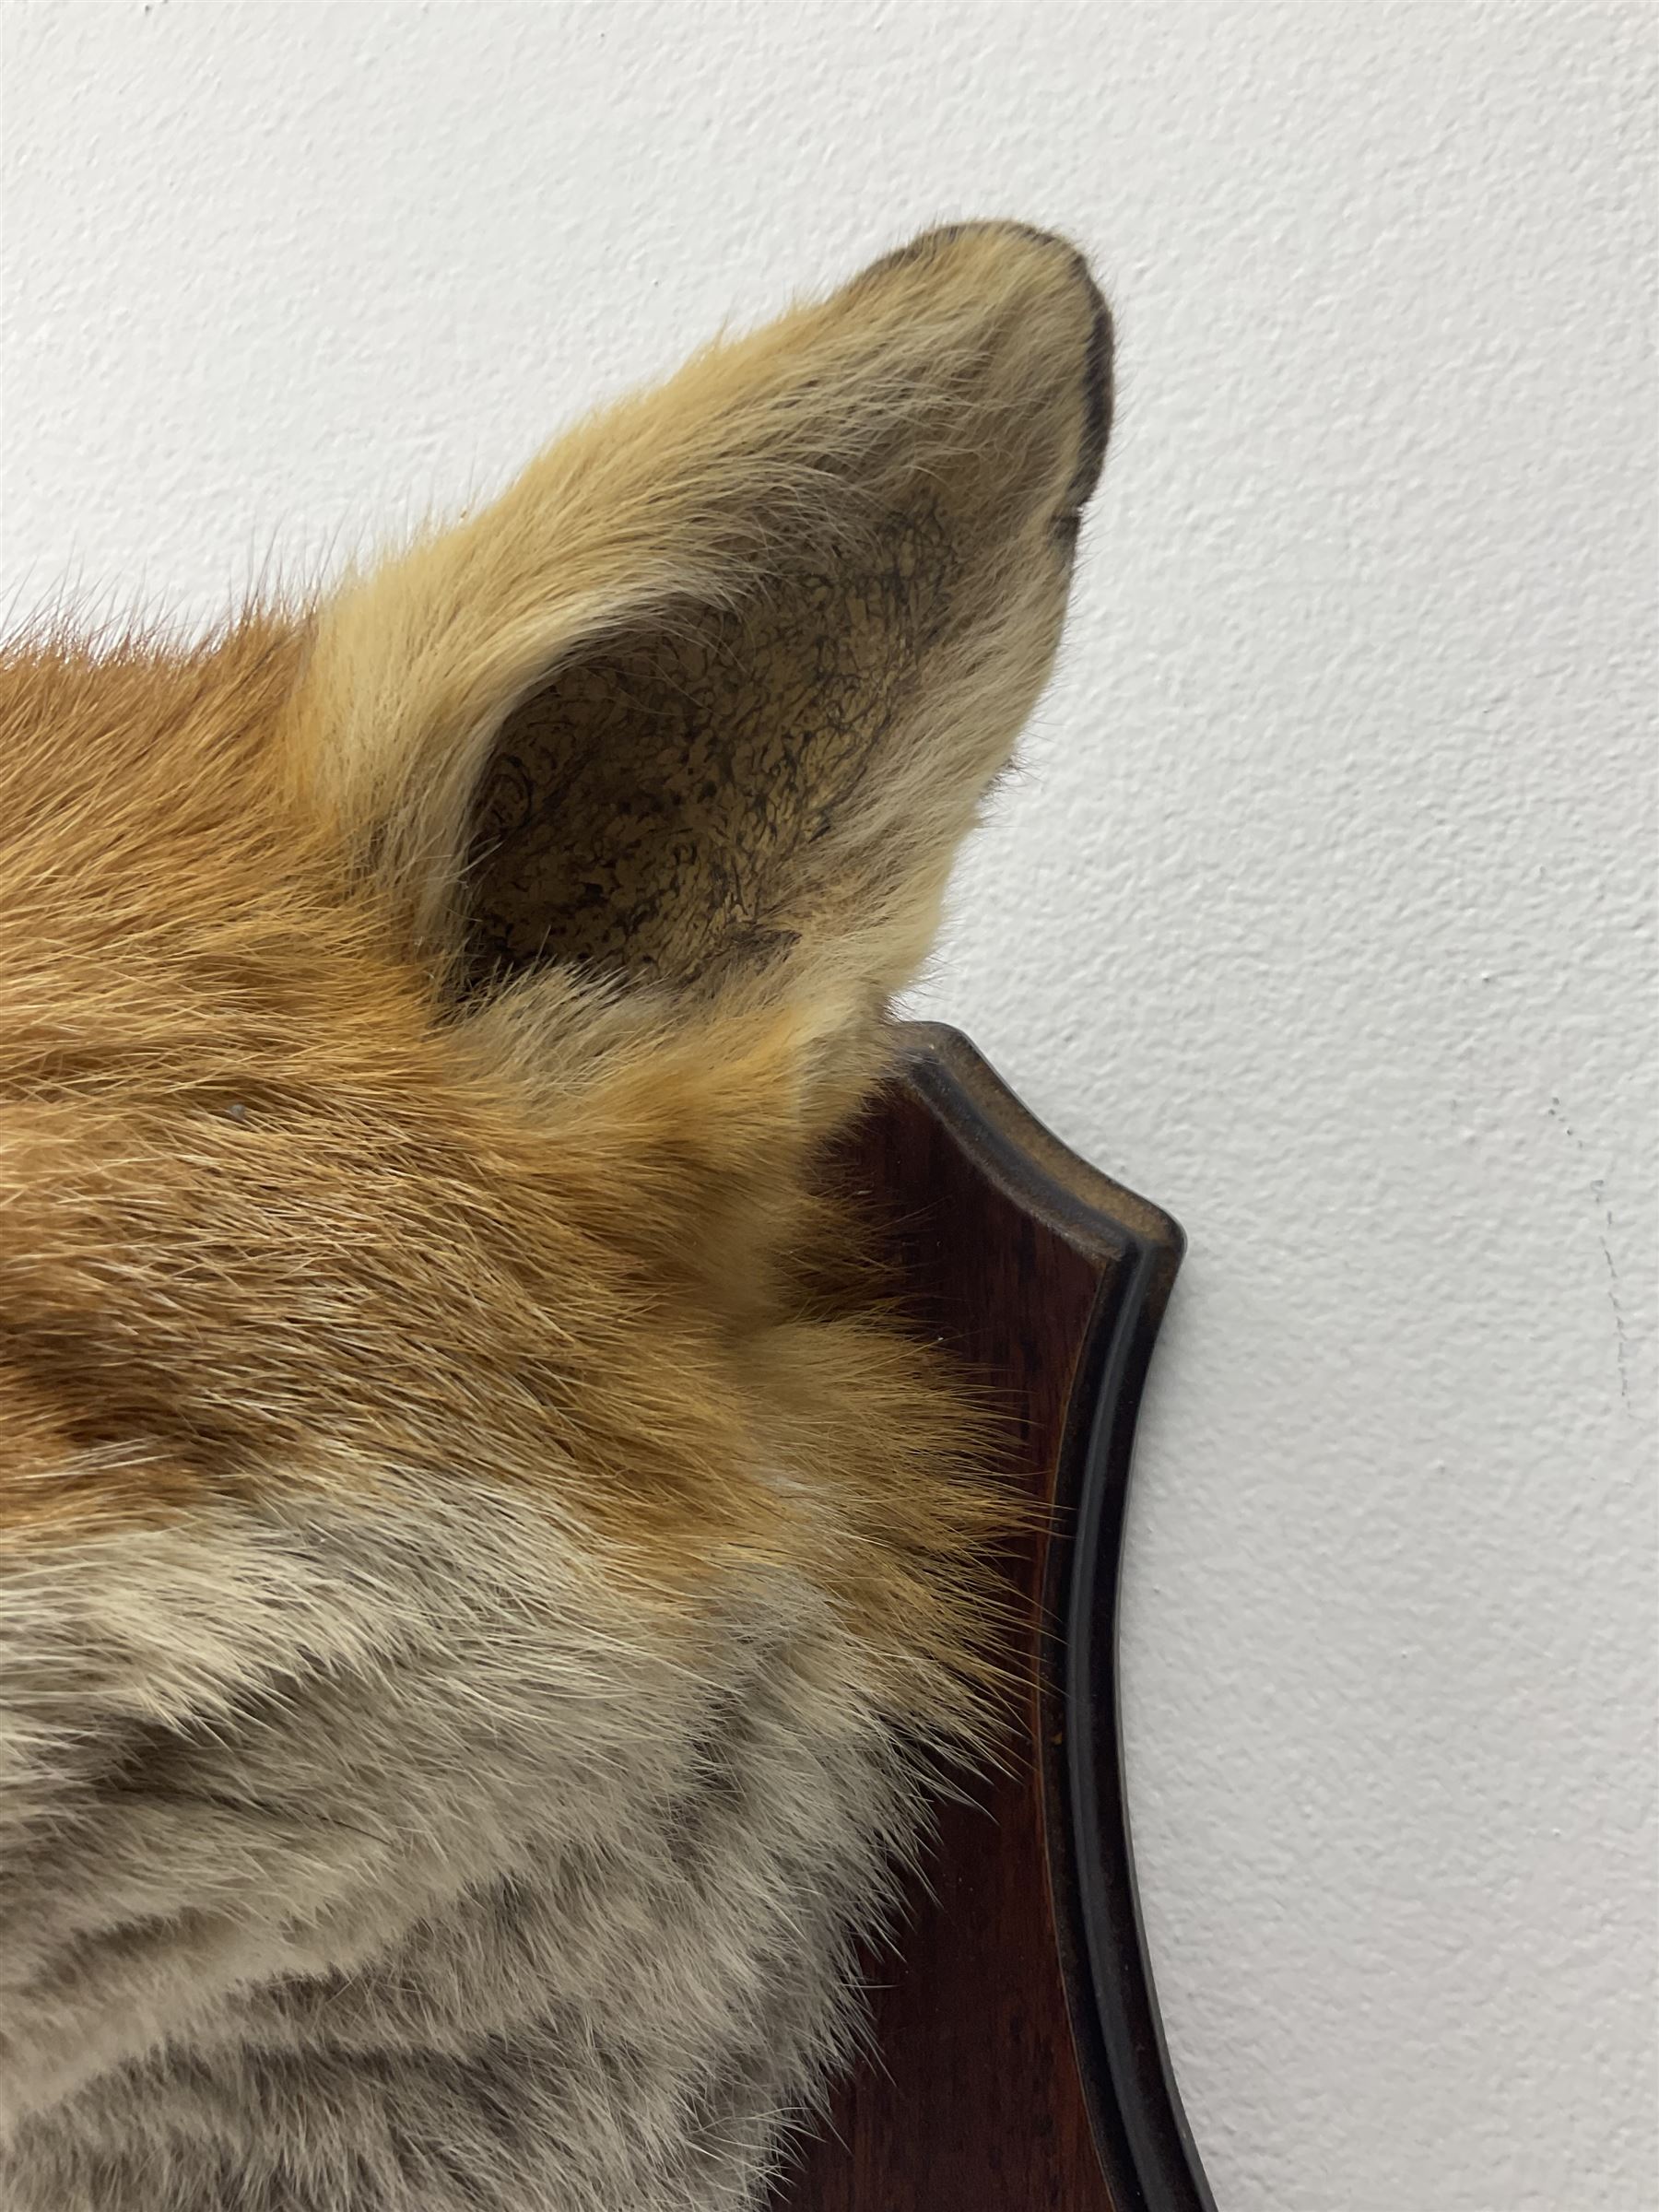 Taxidermy: Red fox mask (Vulpes vulpes) - Image 4 of 8